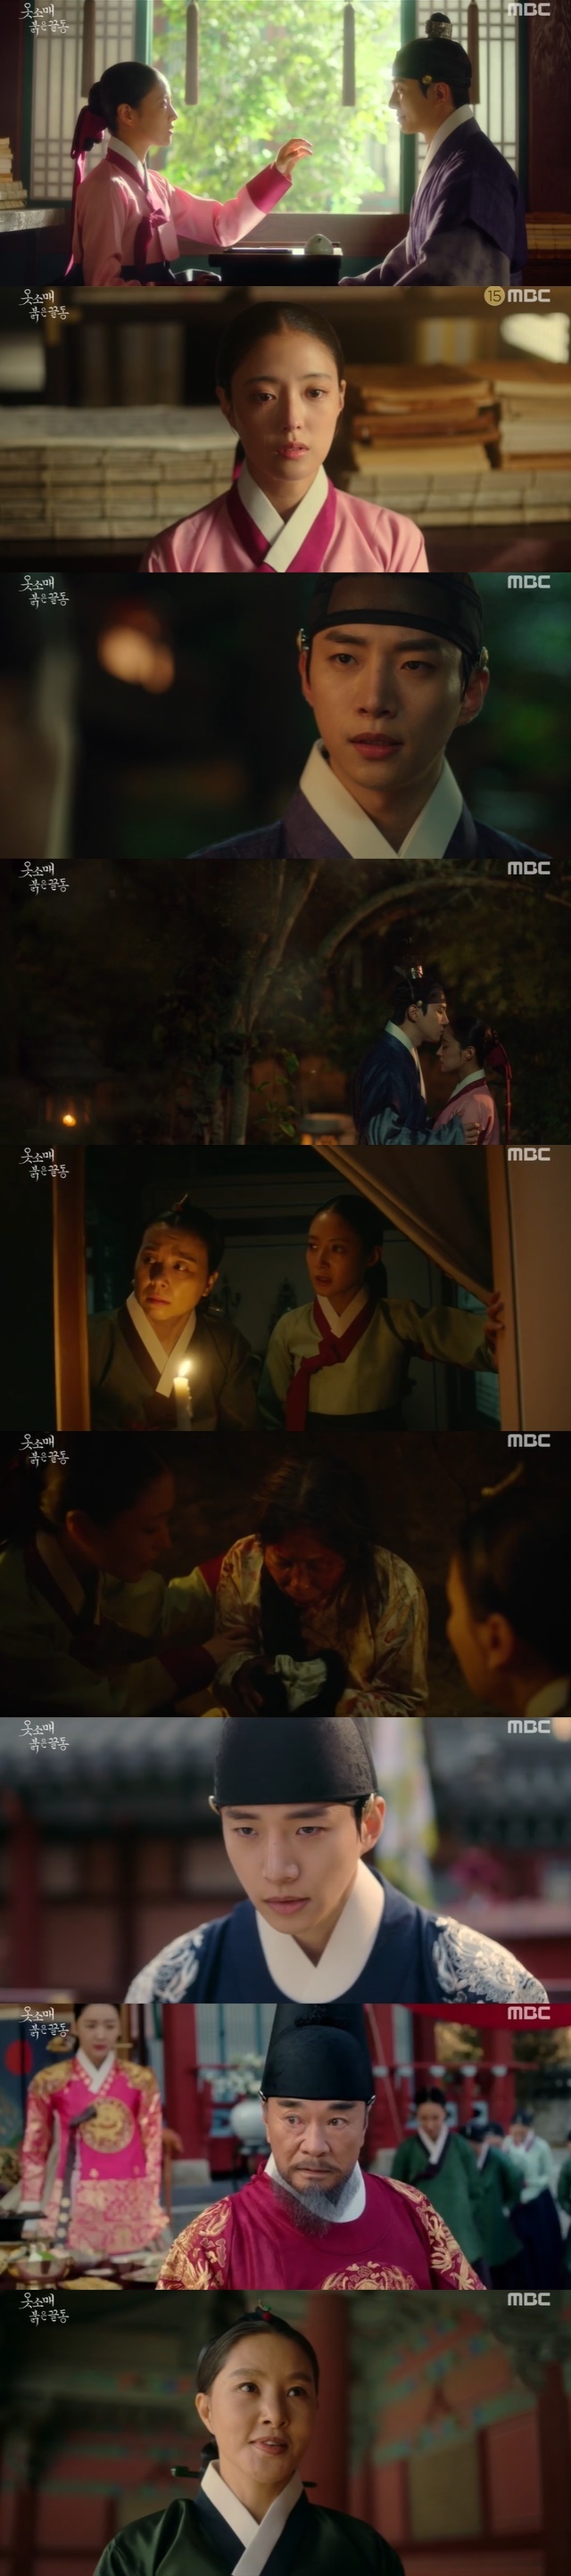 Lee Deok-hwa is set up in Danger after falling into a trap at Park Ji-YoungIn the 10th episode of MBCs gilt drama The Red Sleeve (playplayplay by Jeong Hae-ri / directed by Jung Ji-in and Song Yeon-hwa), which was broadcast on December 11, Lee Joon-hos political Danger was repeated.On this day, after suffering the station memory incident, Suho Chungs military was dragged and rushed.The first to hear this news, Park Ji-Young, was shrewd.Manufacturing palace Cho moved Hong Jeong-yeo (Joe Hee-bong) to make him see Young-jo (Lee Deok-hwa).Hong Jeong-yeo played a role in raising Yeongjos doubts.Hong Jung-yi insisted that the people were terrified by the coming of Suho Chungs military and that the people were in fear, that Seson had a station memory, but that it was an excuse, and that Seson was trying to show the king who was commanding the Suho Chung military.As Yeongjo fell on it, as soon as the separated country returned, he took the house and dispatched an innumerable person to find out the truth of the station memory case.The court also moved the palace (the palace) to the side of Baro, Daejeon, where Ahn was to be returned for ten days.Sung Duk-im (Lee Se-young), who was in a quarrel, was ordered to keep his library and stayed there and worried about the separation all the time. Sung Duk-im said, I want to see without knowing himself.The Confessions of this kind of virtue were separated. After spending time with Sung Duk Lim, Lee asked, Who was the person who wanted to see it in the library?Issan vaguely noticed that he was himself, Duck, I can not pretend anymore, I do not want to. If your heart is like me, what I want to say is...I tried to confessions, saying, You.But Sung Duk-im said again, I told you to think about Hope, he said, saying that he would give the award to the credit that blocked the station memory.Defeat is safe for you. Dont think otherwise until that day. You must be a good king. You have time to think of other things.When I heard the words of Sung Duk-im, Please do not come, Isan tried to turn his foot, and returned and kissed his forehead.I will do my best to go to the Bowie for a while.On the other hand, Yeongjo called for a manufacturing palace Cho and apologized for the past years.The manufacturing palace Cho asked why Yeongjo chose Young Bin (Nam Ki-ae) as his concubine, not himself.Youngjo said that when he looked at the manufacturing palace Cho, he looked like a mirror, and Young Bin was like a resting place.Manufacturing palace Cho convinced everything.Seong Duk-im heard the sound of Kang Wol-hye (Ji-eun), who accidentally threatened Seo Sang-gung while going to see Seo Sang-gung (Jang Hye-jin).So Sung Duk-im began to speculate that there may be a Gwanghan Palace behind the station memory in the palace.Sung Duk-im went into action to prevent Seo Sang-gung from losing his life as a member of the station memory.Sung Duk-im sneaked into the manufacturing palace Chos place with the help of his comrades, and Sung Duk-im was going to find the place of the Gwanghan Palace and erase the name of the Seosang Palace.And while the comrades used their bases to make time for the manufacturing palace Cho to enter the house, Seongdeokim and Seosanggung found the gate (secret entrance) to Gwanghangung and headed inside.Seongdeokim and Seosanggung visited the port (the hat used in the cold) that Park Sanggung (Cha Mi-kyung) wanted to convey to Isan earlier.Soon, he also found Park Sang-gung, who was tortured and imprisoned in a secret prison.Sung Duk-im left this place with this Park Sang-gung, and the manufacturing palace Cho found the empty prison late and could not hide his dismay.Isan held firm, thinking that it was a virtue even during the difficult times due to the suspicion of Yeongjo.And Hwawanongju was introduced to the deliberation from the manufacturing place to break down the discrete, and took the measure to break down the three hands at once from her.Something happened at the banquet.Kim (Jang Hee-jin) informed Yeongjo, Everyone who gathered here prepared food for the king. He advised me to match who prepared the food for entertainment.In some order, the raw and crab fields appeared, touching the backdrop of Yeongjo, who is suspected of poisoning his own type of alarm.Earlier, the manufacturing palace Cho was also a food planned to break down the discrete before the arrival of Ahn.